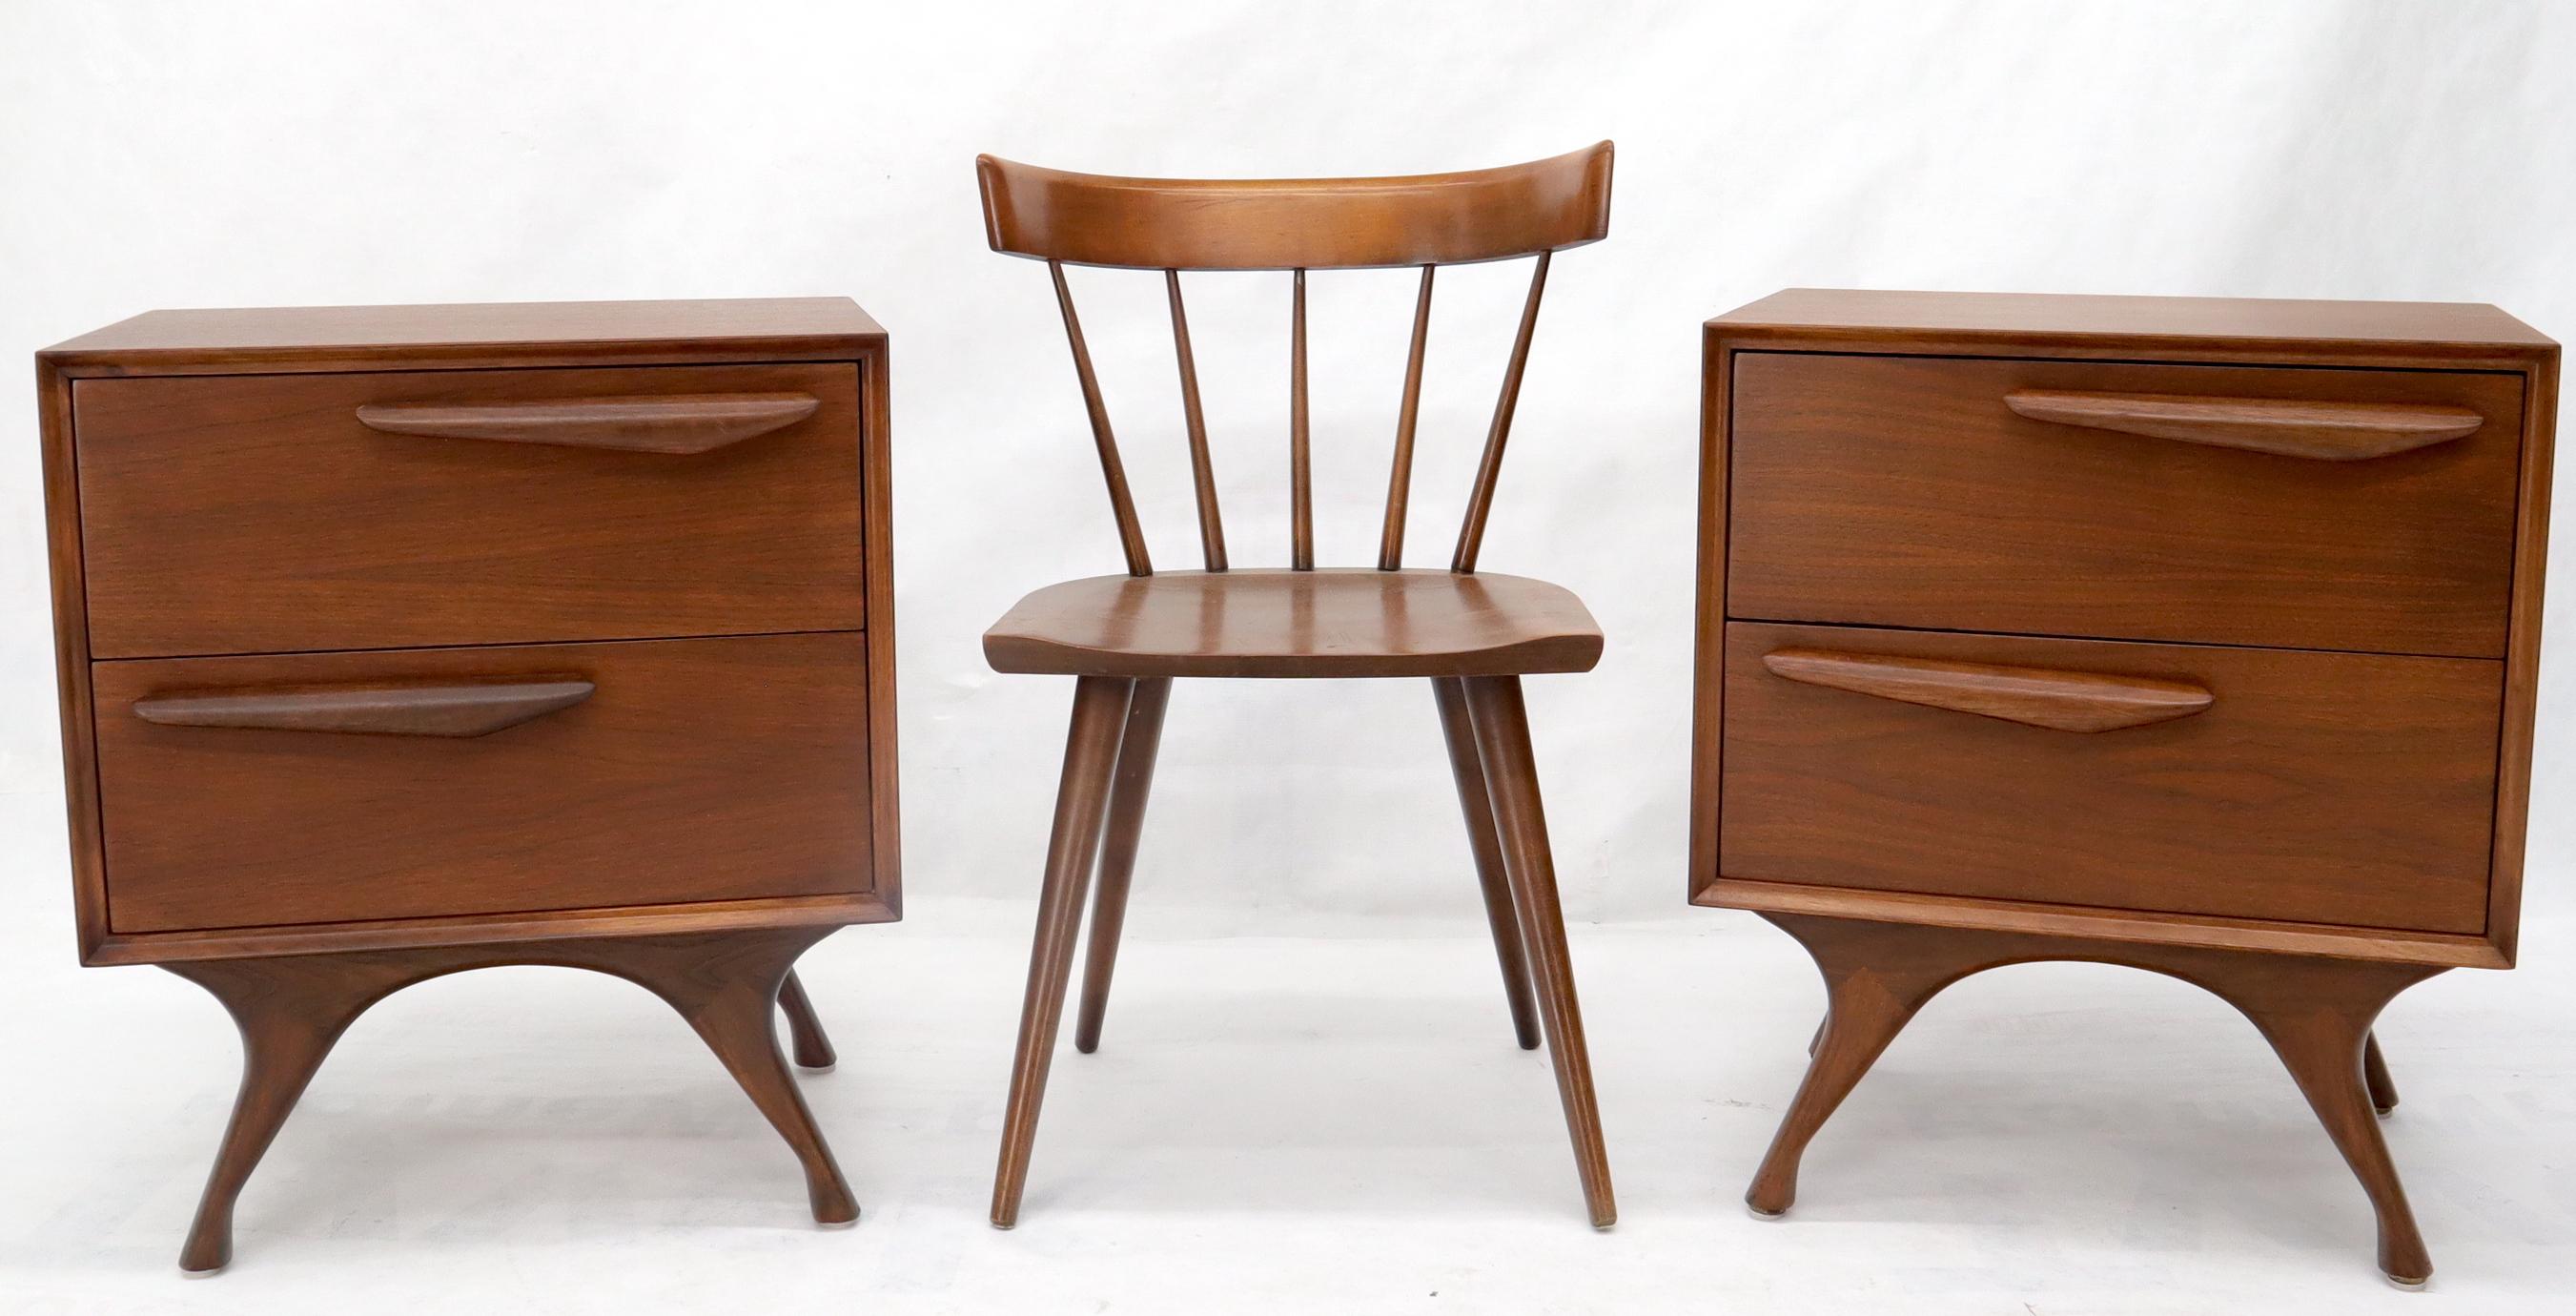 Pair of American Modern Walnut Sculptured Legs Pulls Two Drawers Nightstands In Excellent Condition For Sale In Rockaway, NJ